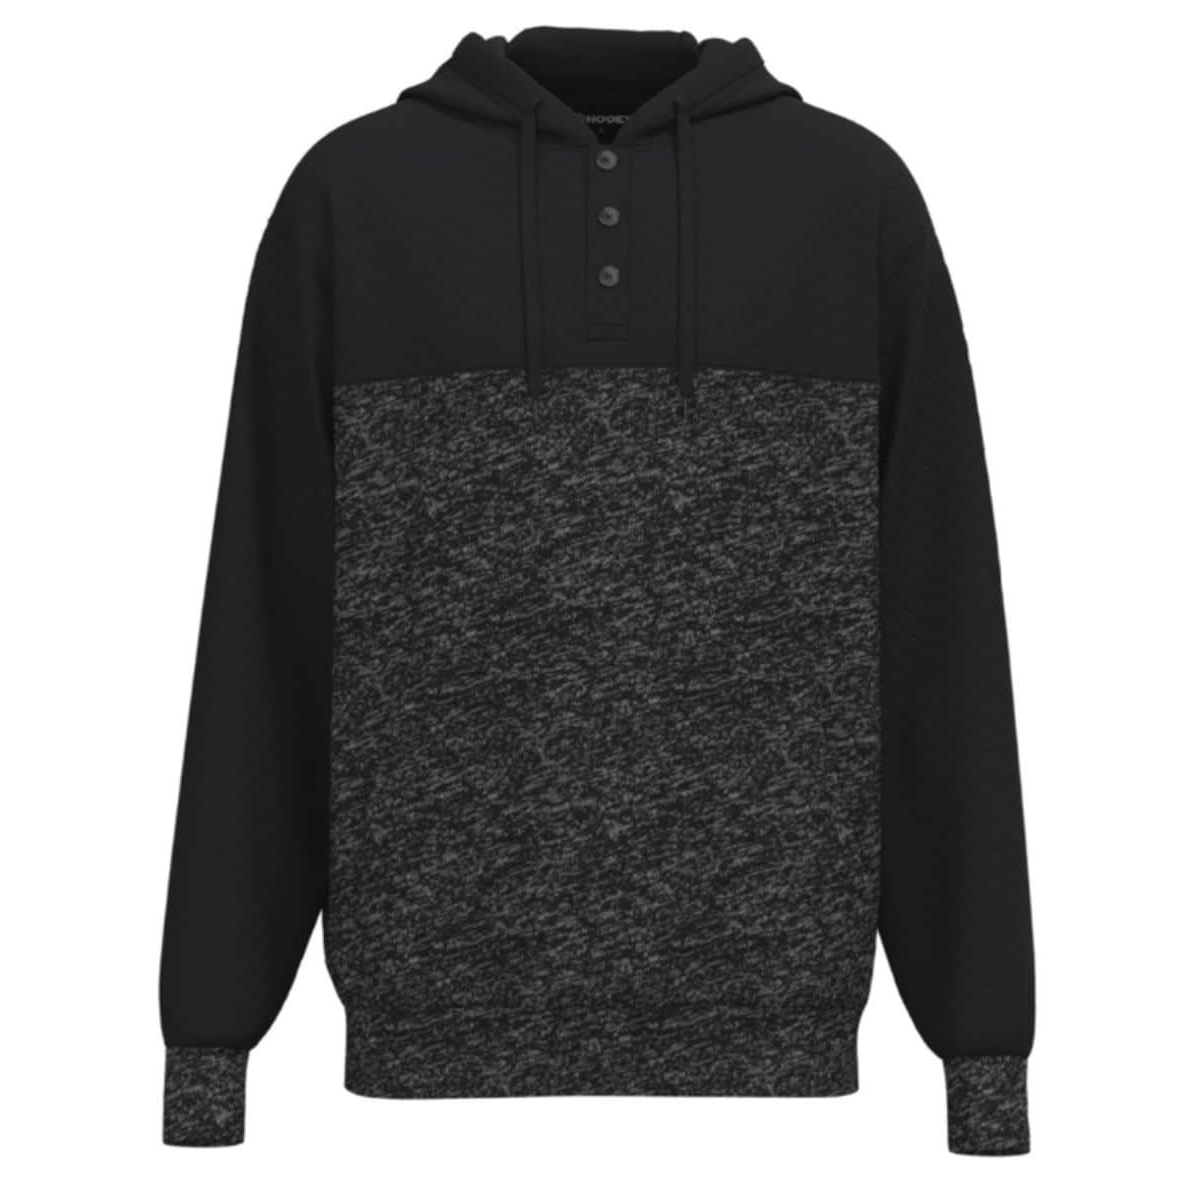 Hooey Men's "Jimmy" Black With Quilted Detail Sweater Hoodie HH1194BK